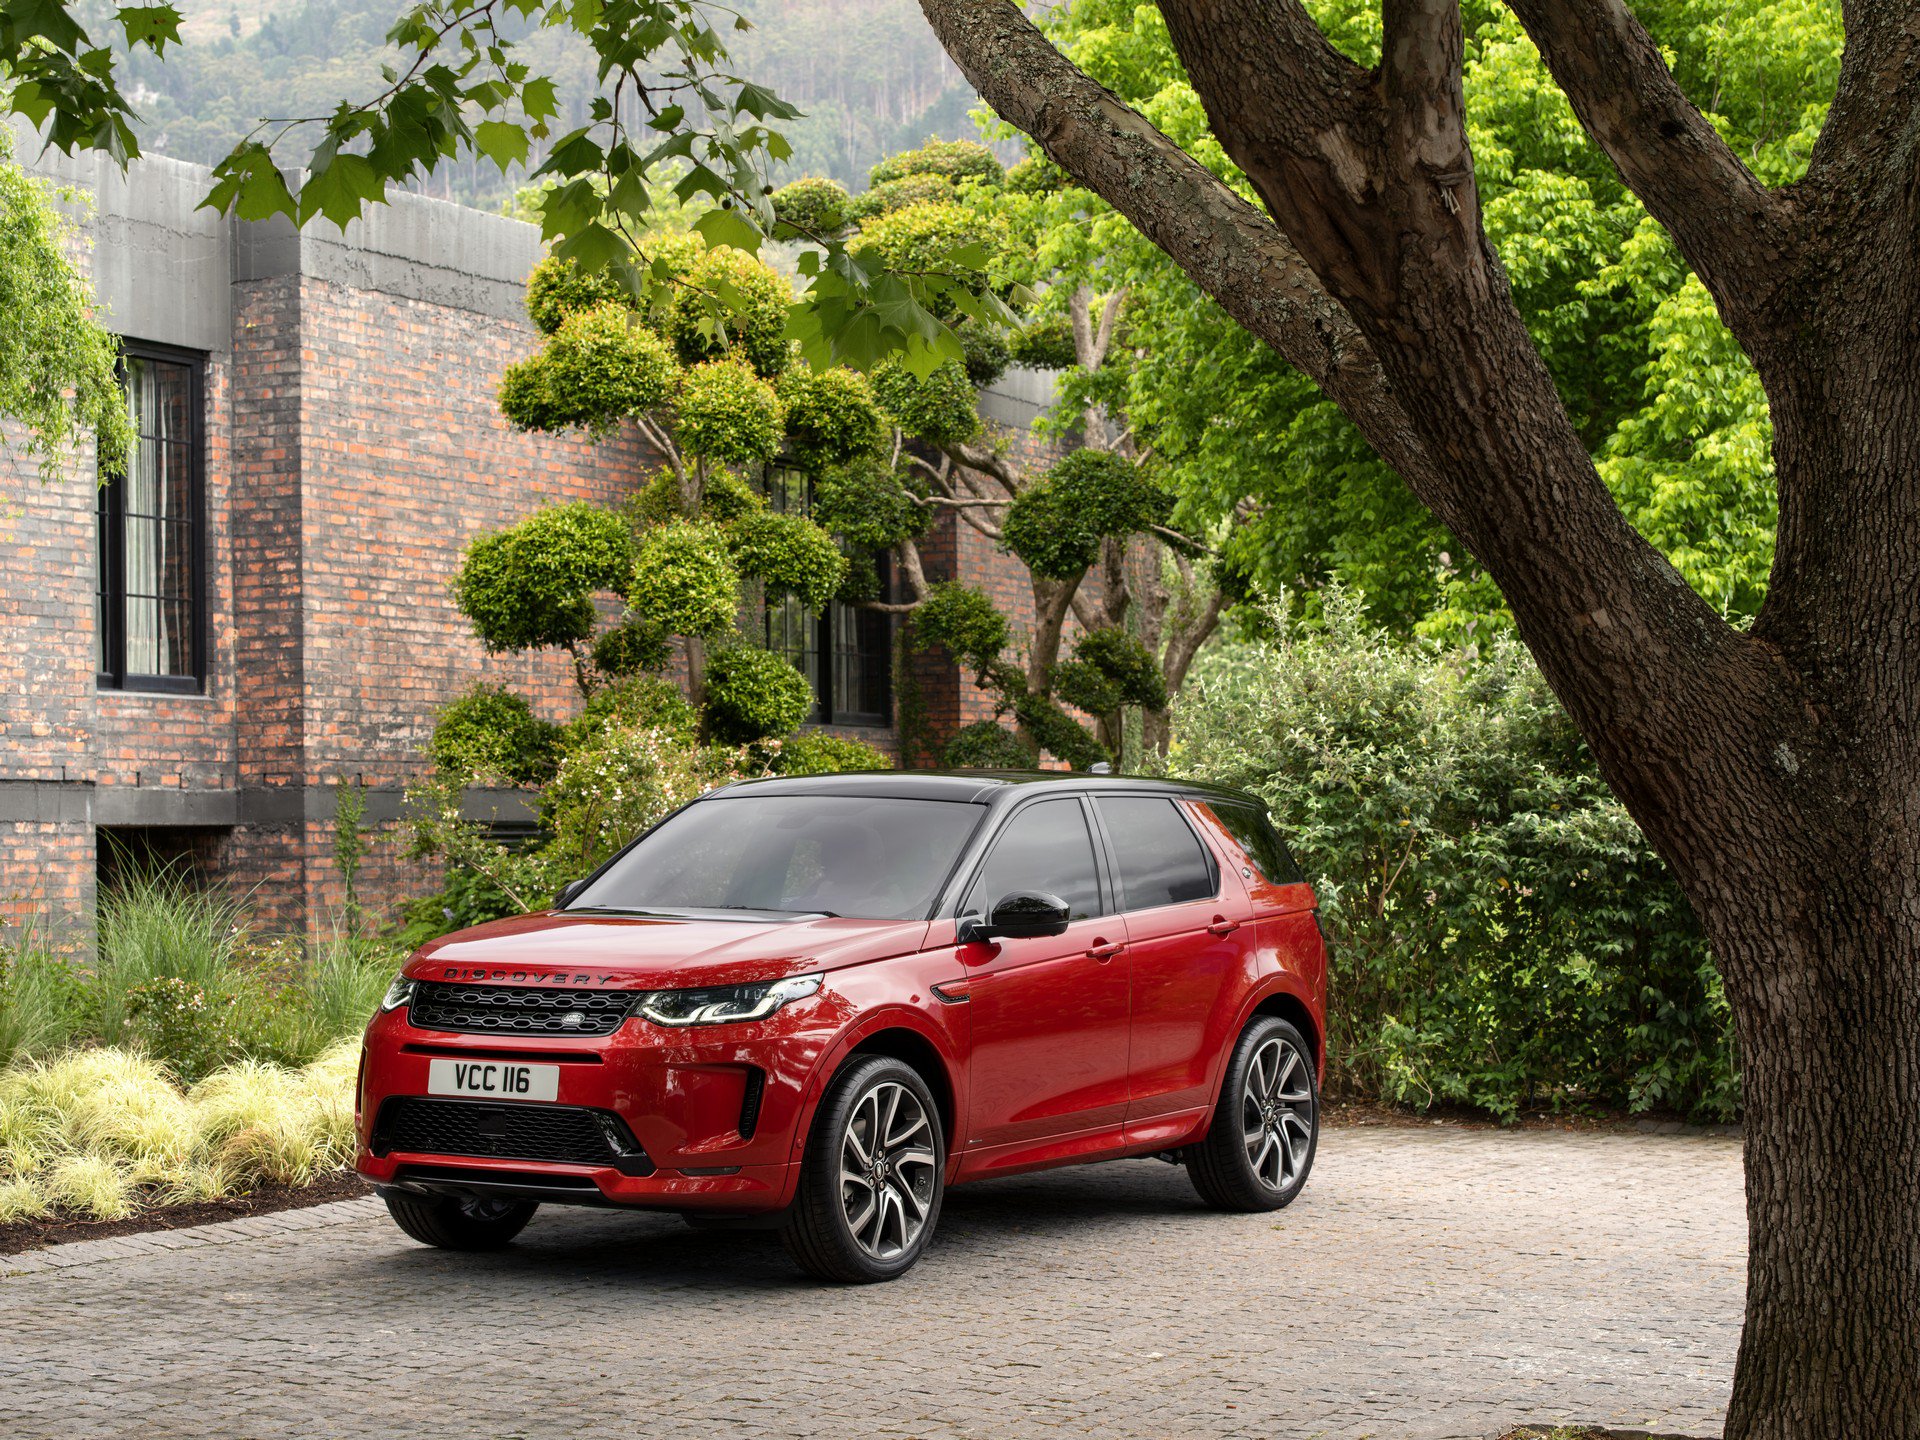 2020 Land Rover Discovery Sport Gets Mild Hybrid System From Range Rover Evoque 30 